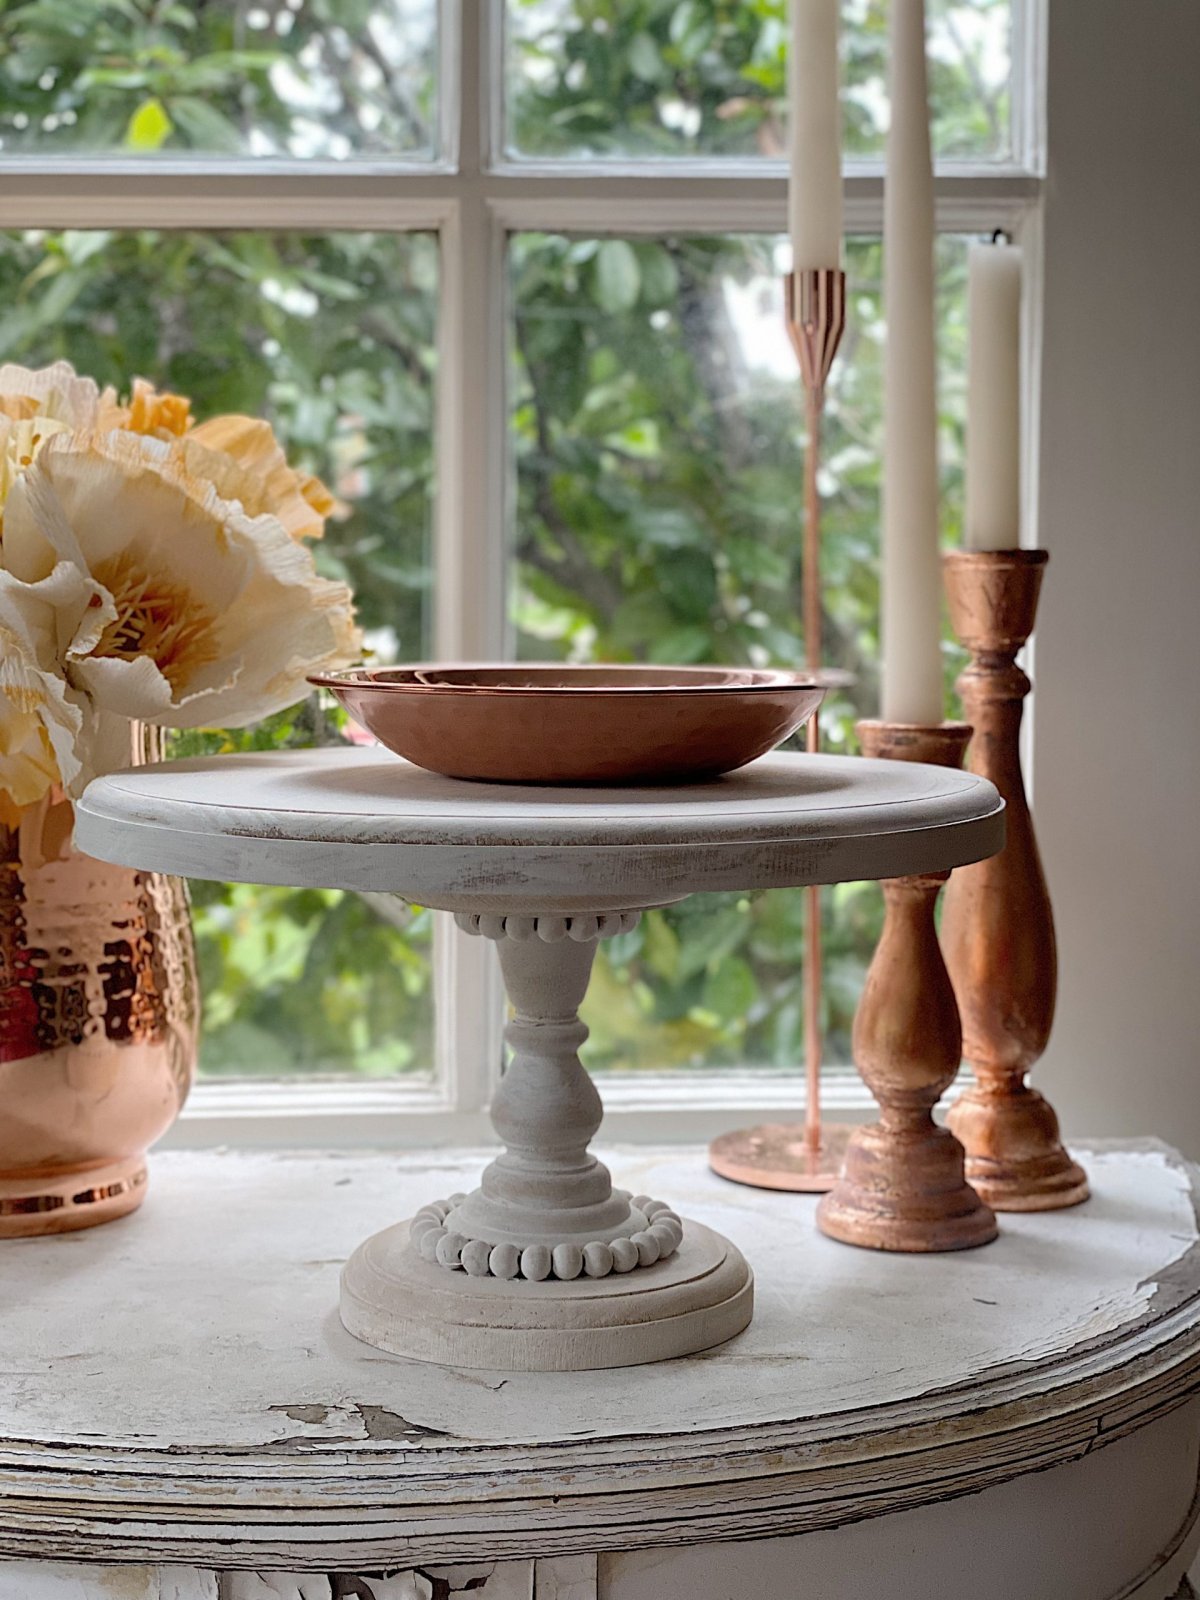 Six Ways to Style a Cake Stand within Your Decor - Deb and Danelle